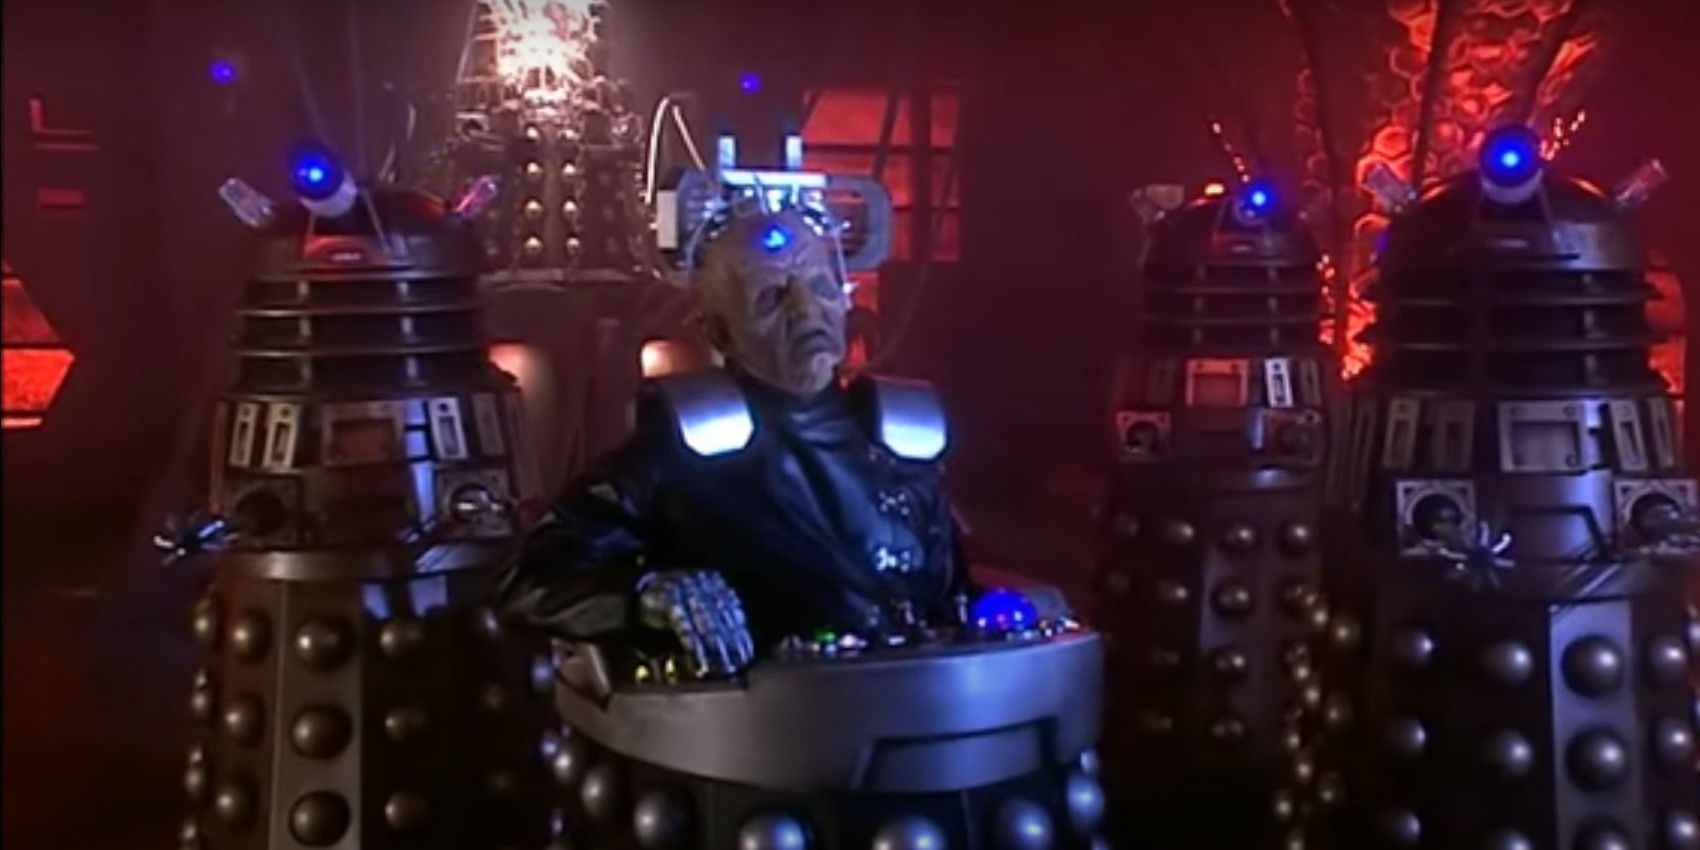 Davros and the Daleks, from Doctor Who, The Stolen Earth